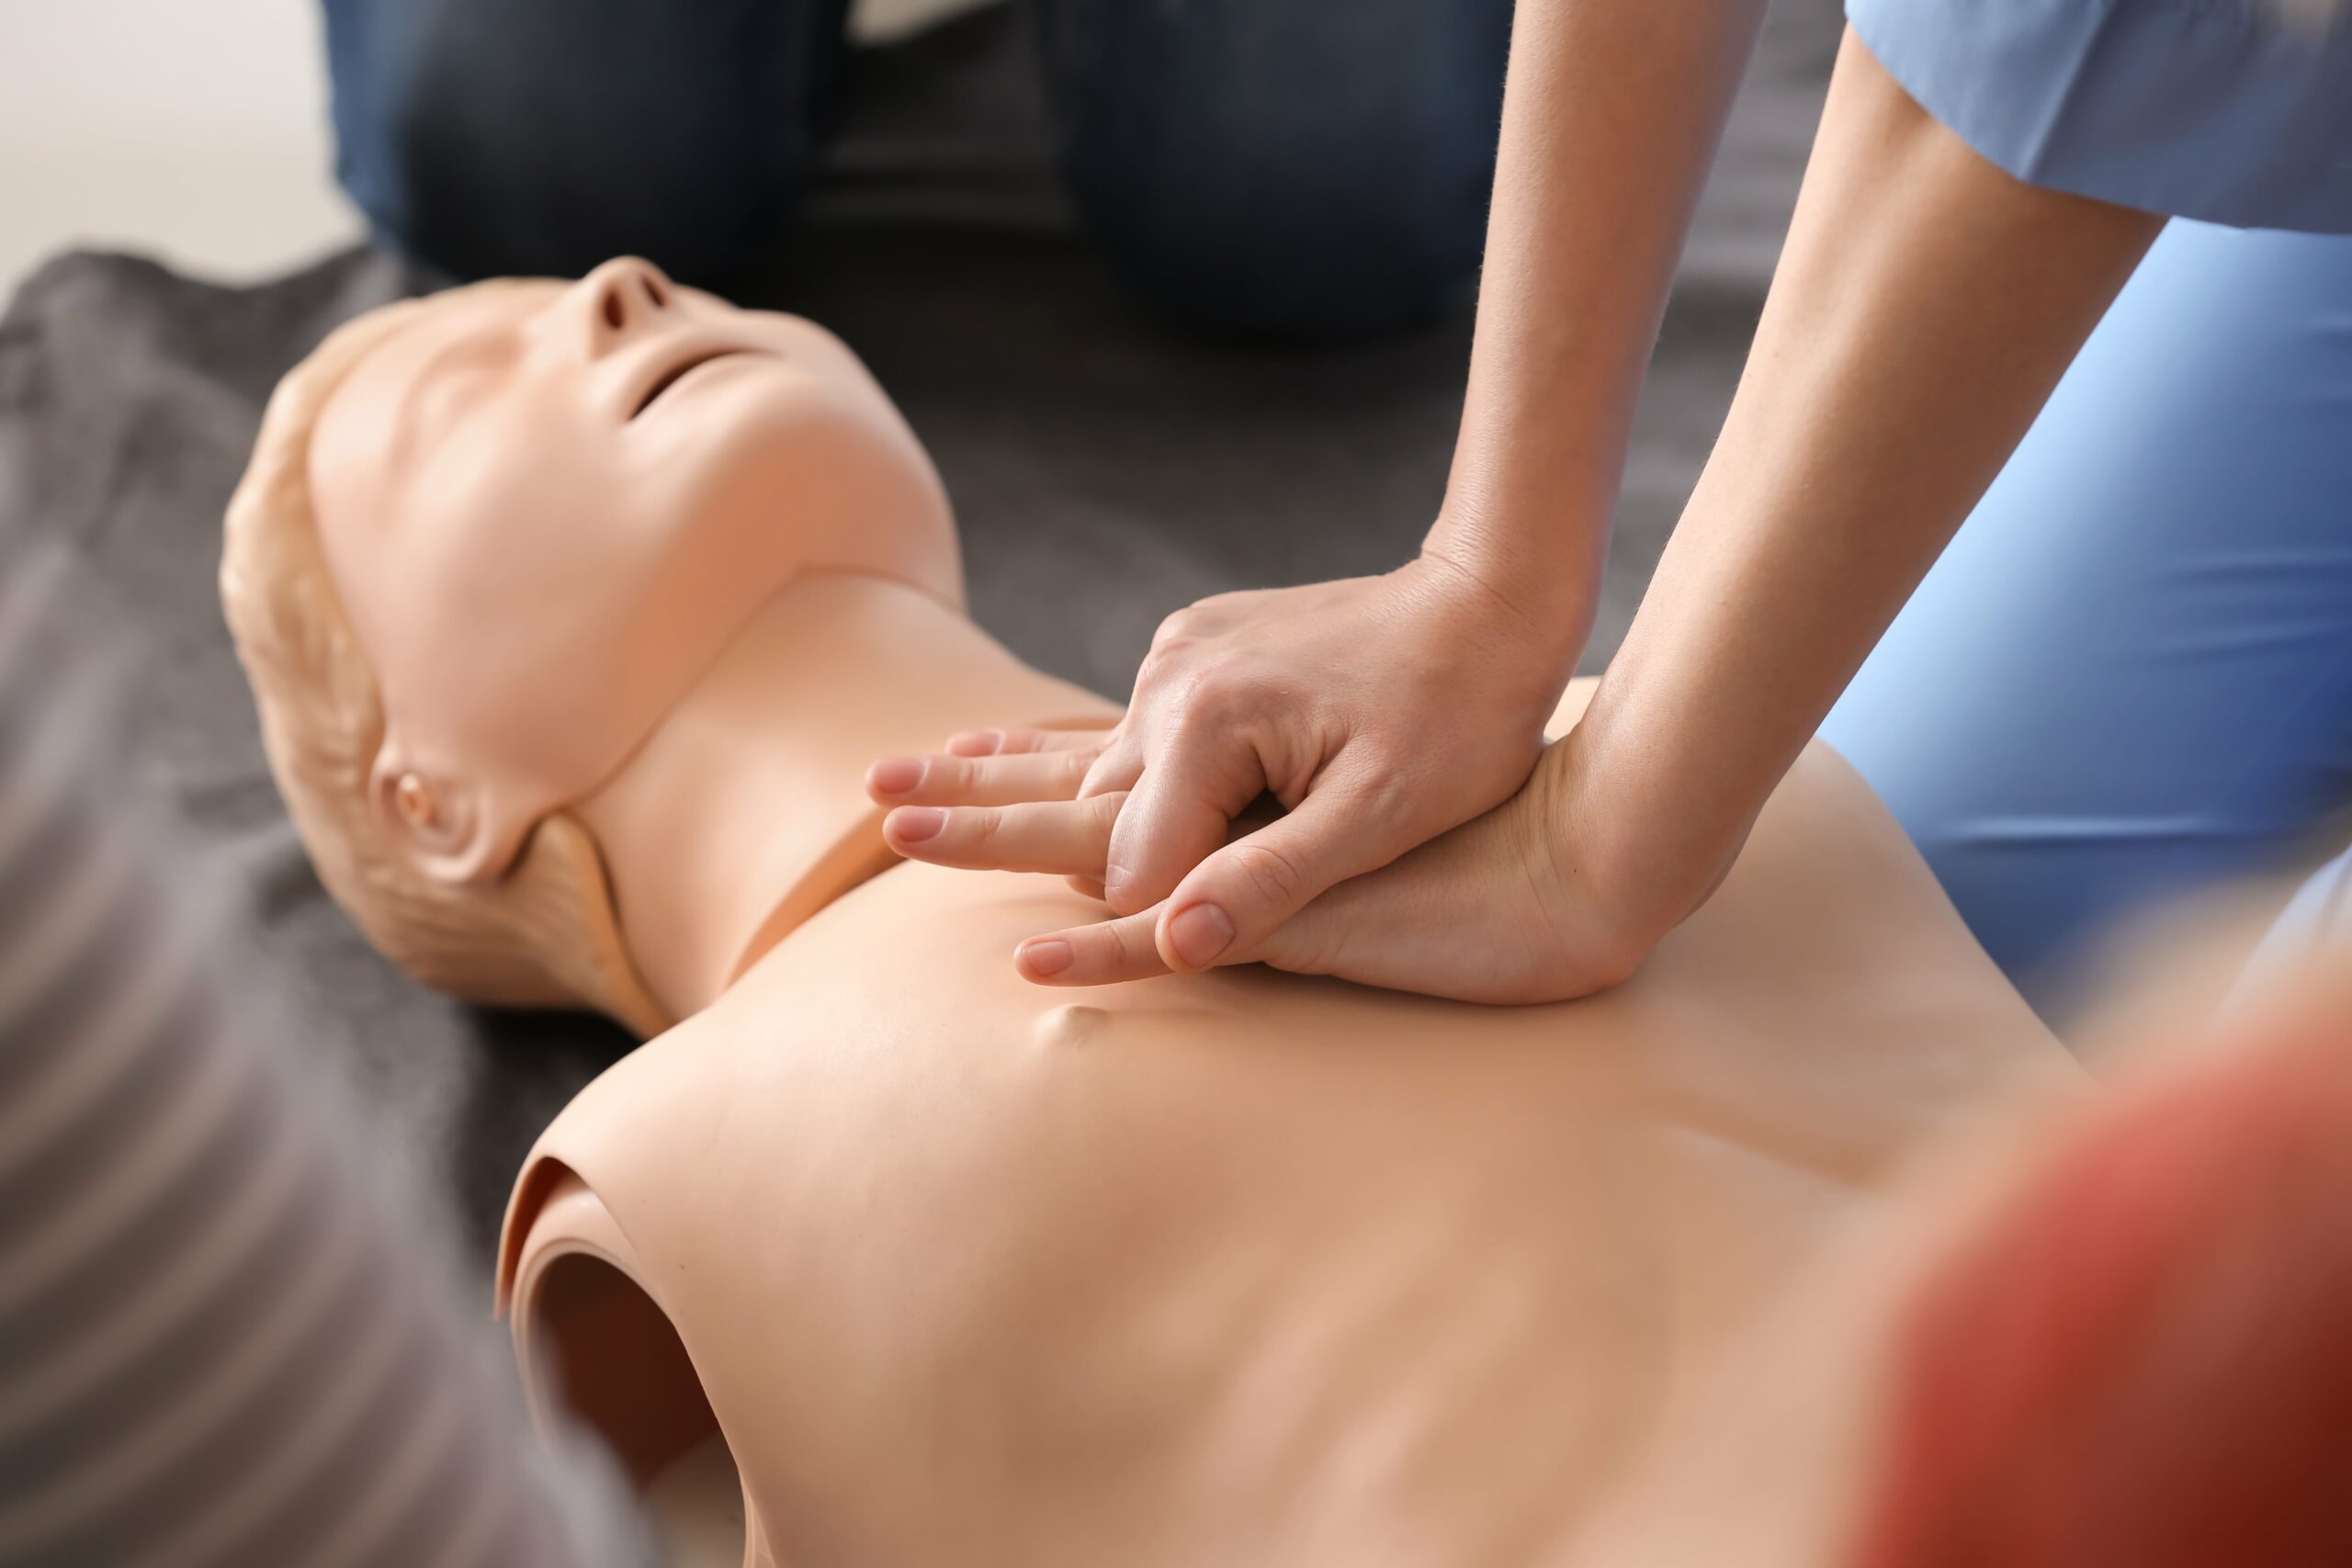 CPR being practiced on a manakin